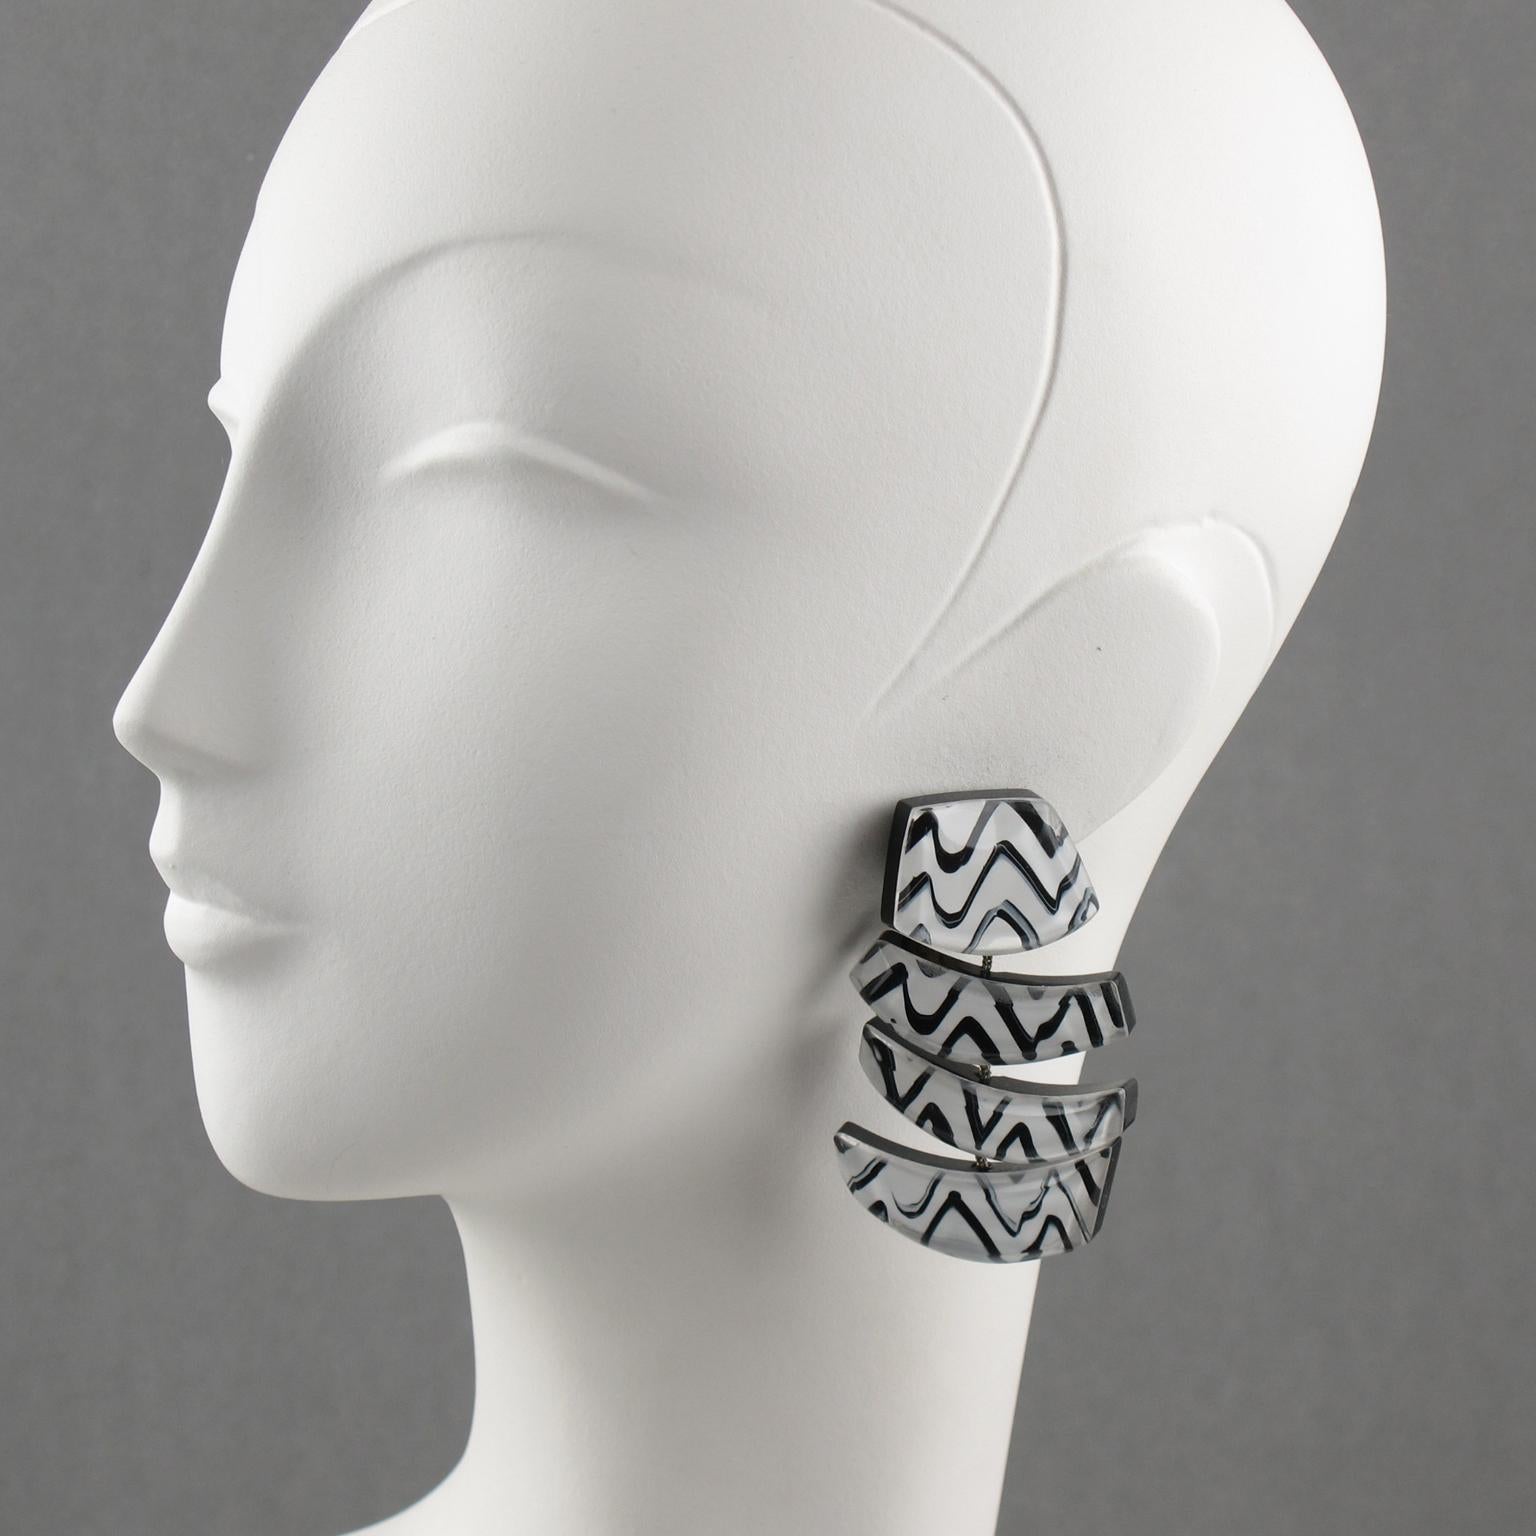 Stunning oversized Lucite clip-on earrings designed by Anne & Frank Vigneri. Huge geometric dangling shape featuring dimensional layer with black and white zig-zag design inclusions and large beveling. The elements are all linked with silver-tone